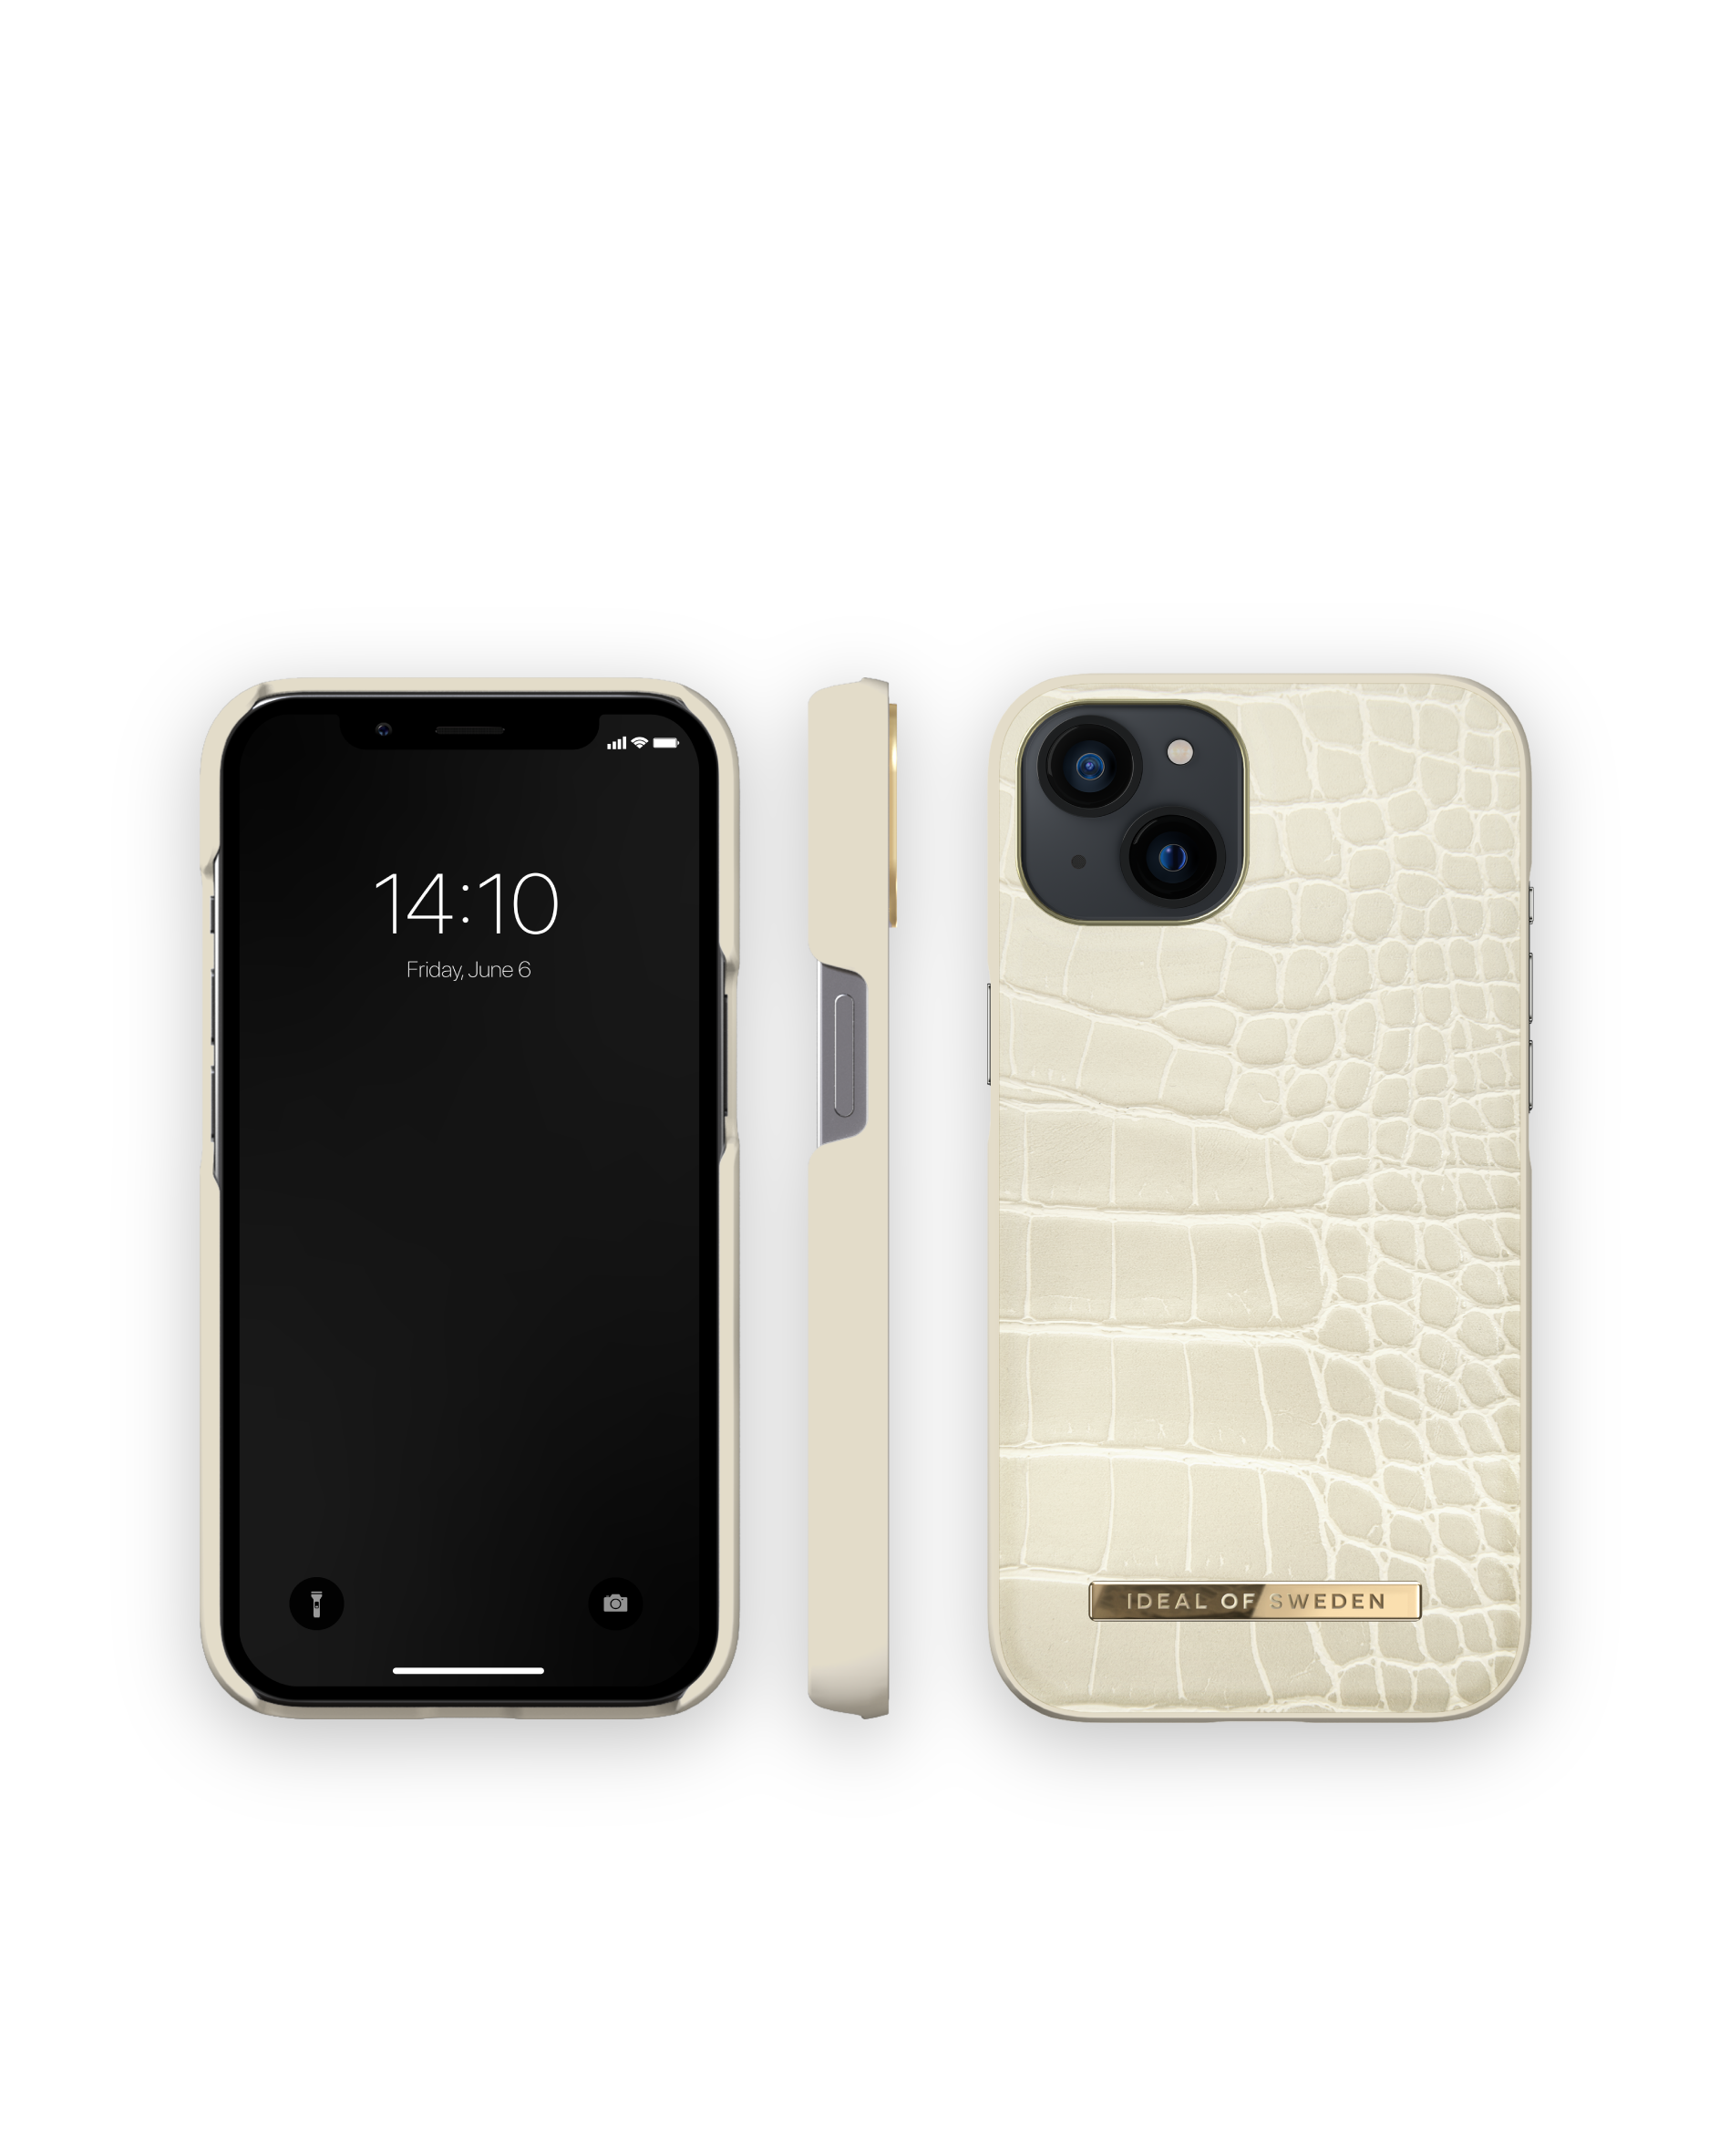 13, Croco Backcover, Beige OF SWEDEN IDACSS22-I2161-395, Cream Apple, iPhone IDEAL - Recycled